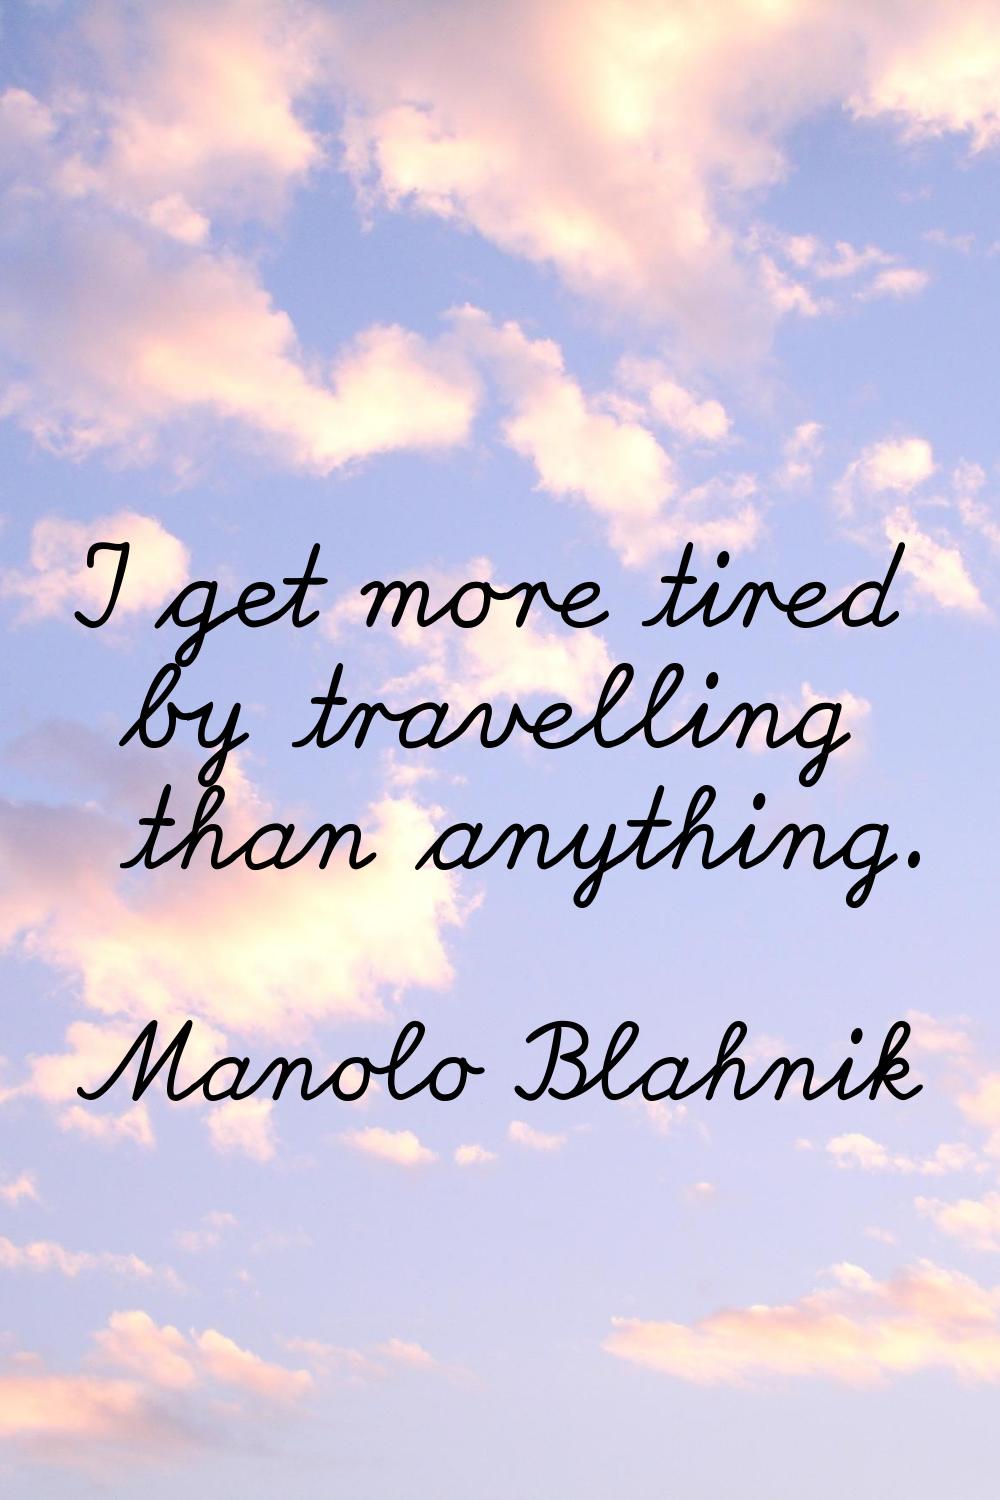 I get more tired by travelling than anything.